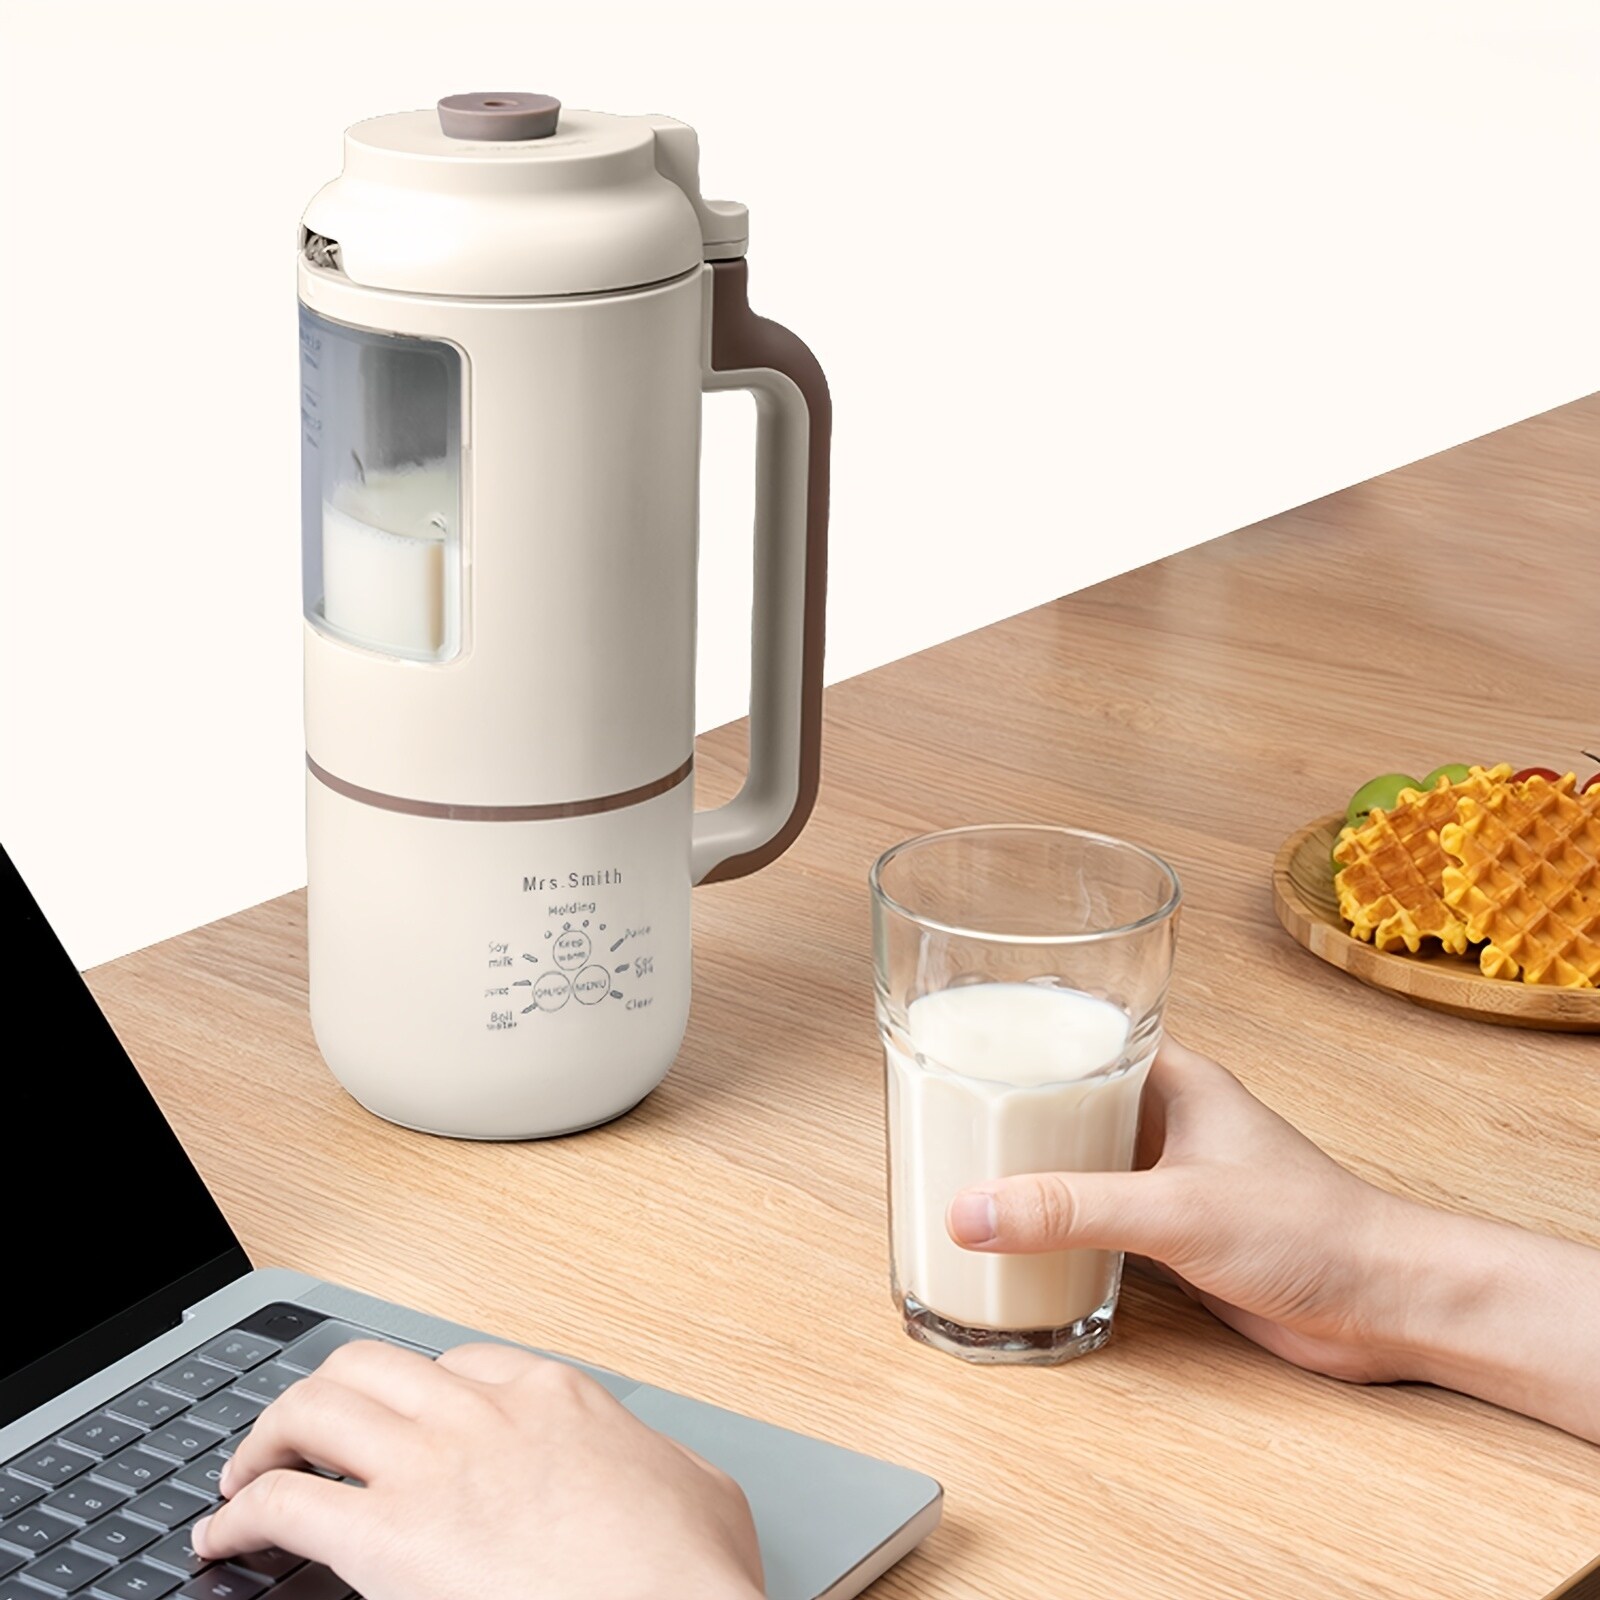 https://ak1.ostkcdn.com/images/products/is/images/direct/f0e38fe33ebf827ee8c189c1ec64a0f7de2ff088/1000ml-Mini-Soybean-Milk-Maker%2CJuicer-Maker%2C-Free-Filtering%2C-Self-Cleaning-For-Household-1-4-Person%2CPortable-Soy-Milk-Machine.jpg